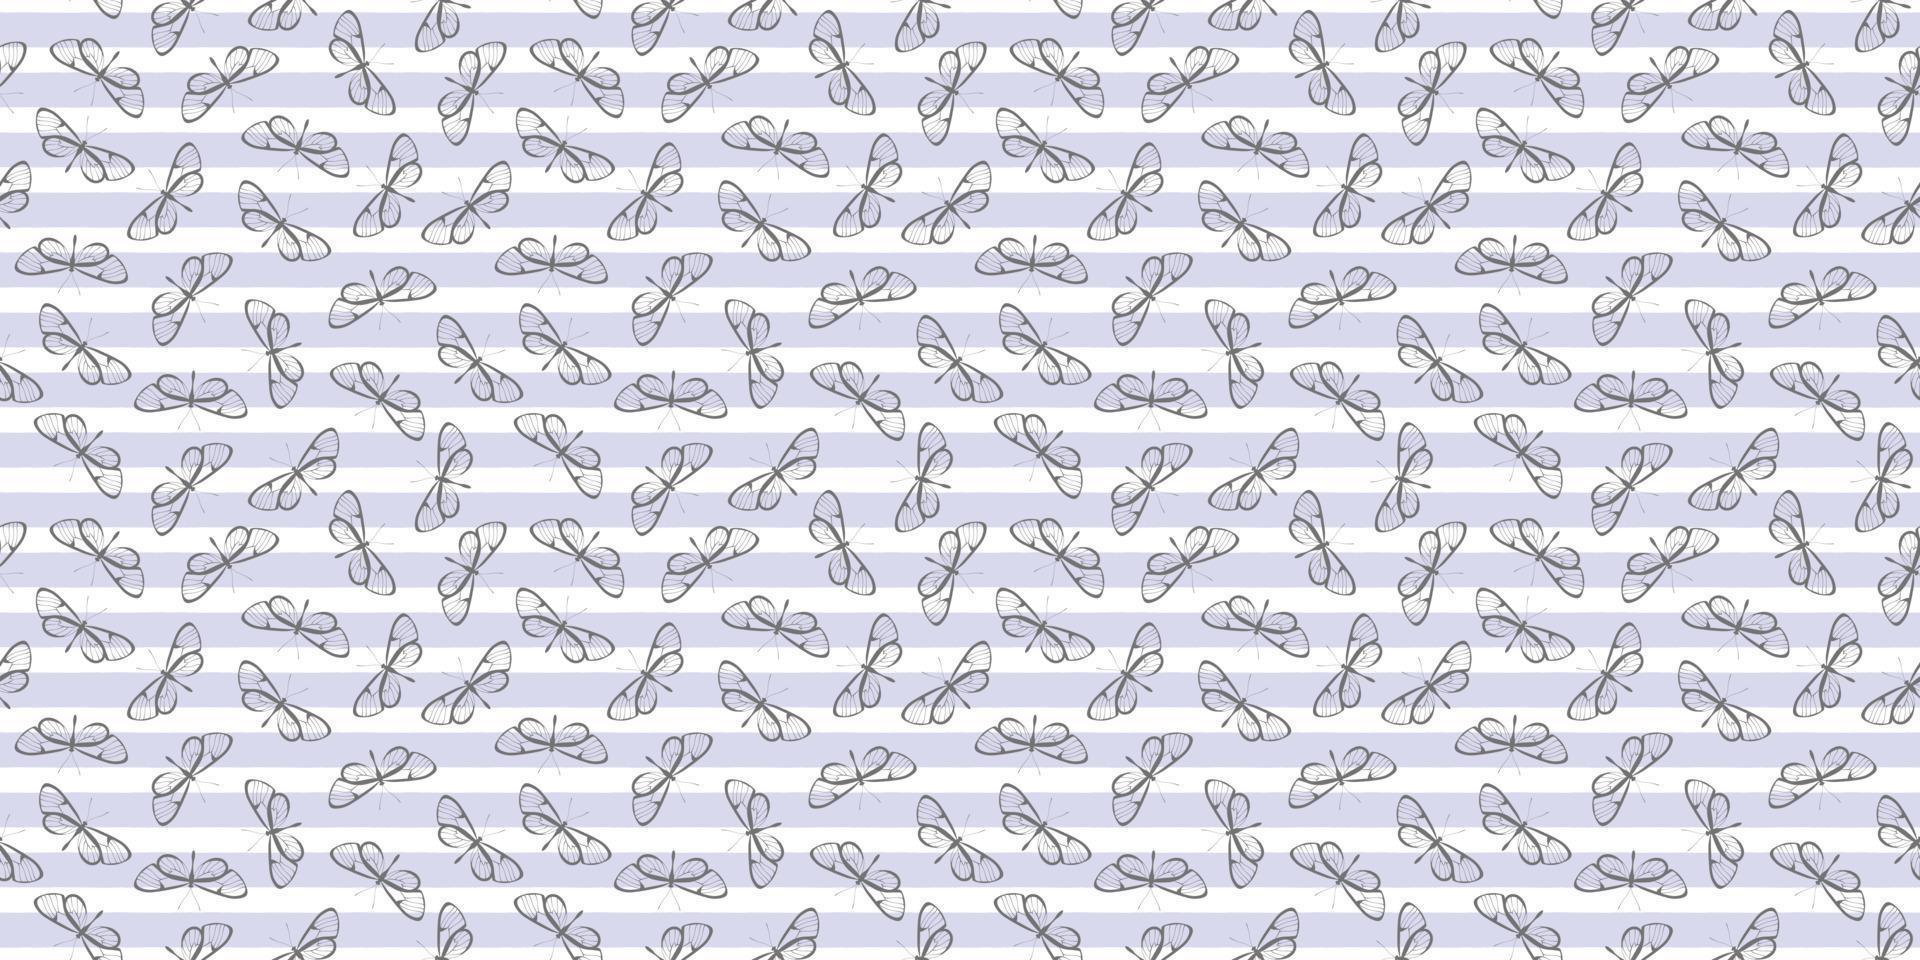 Striped butterfly seamless pattern background. vector